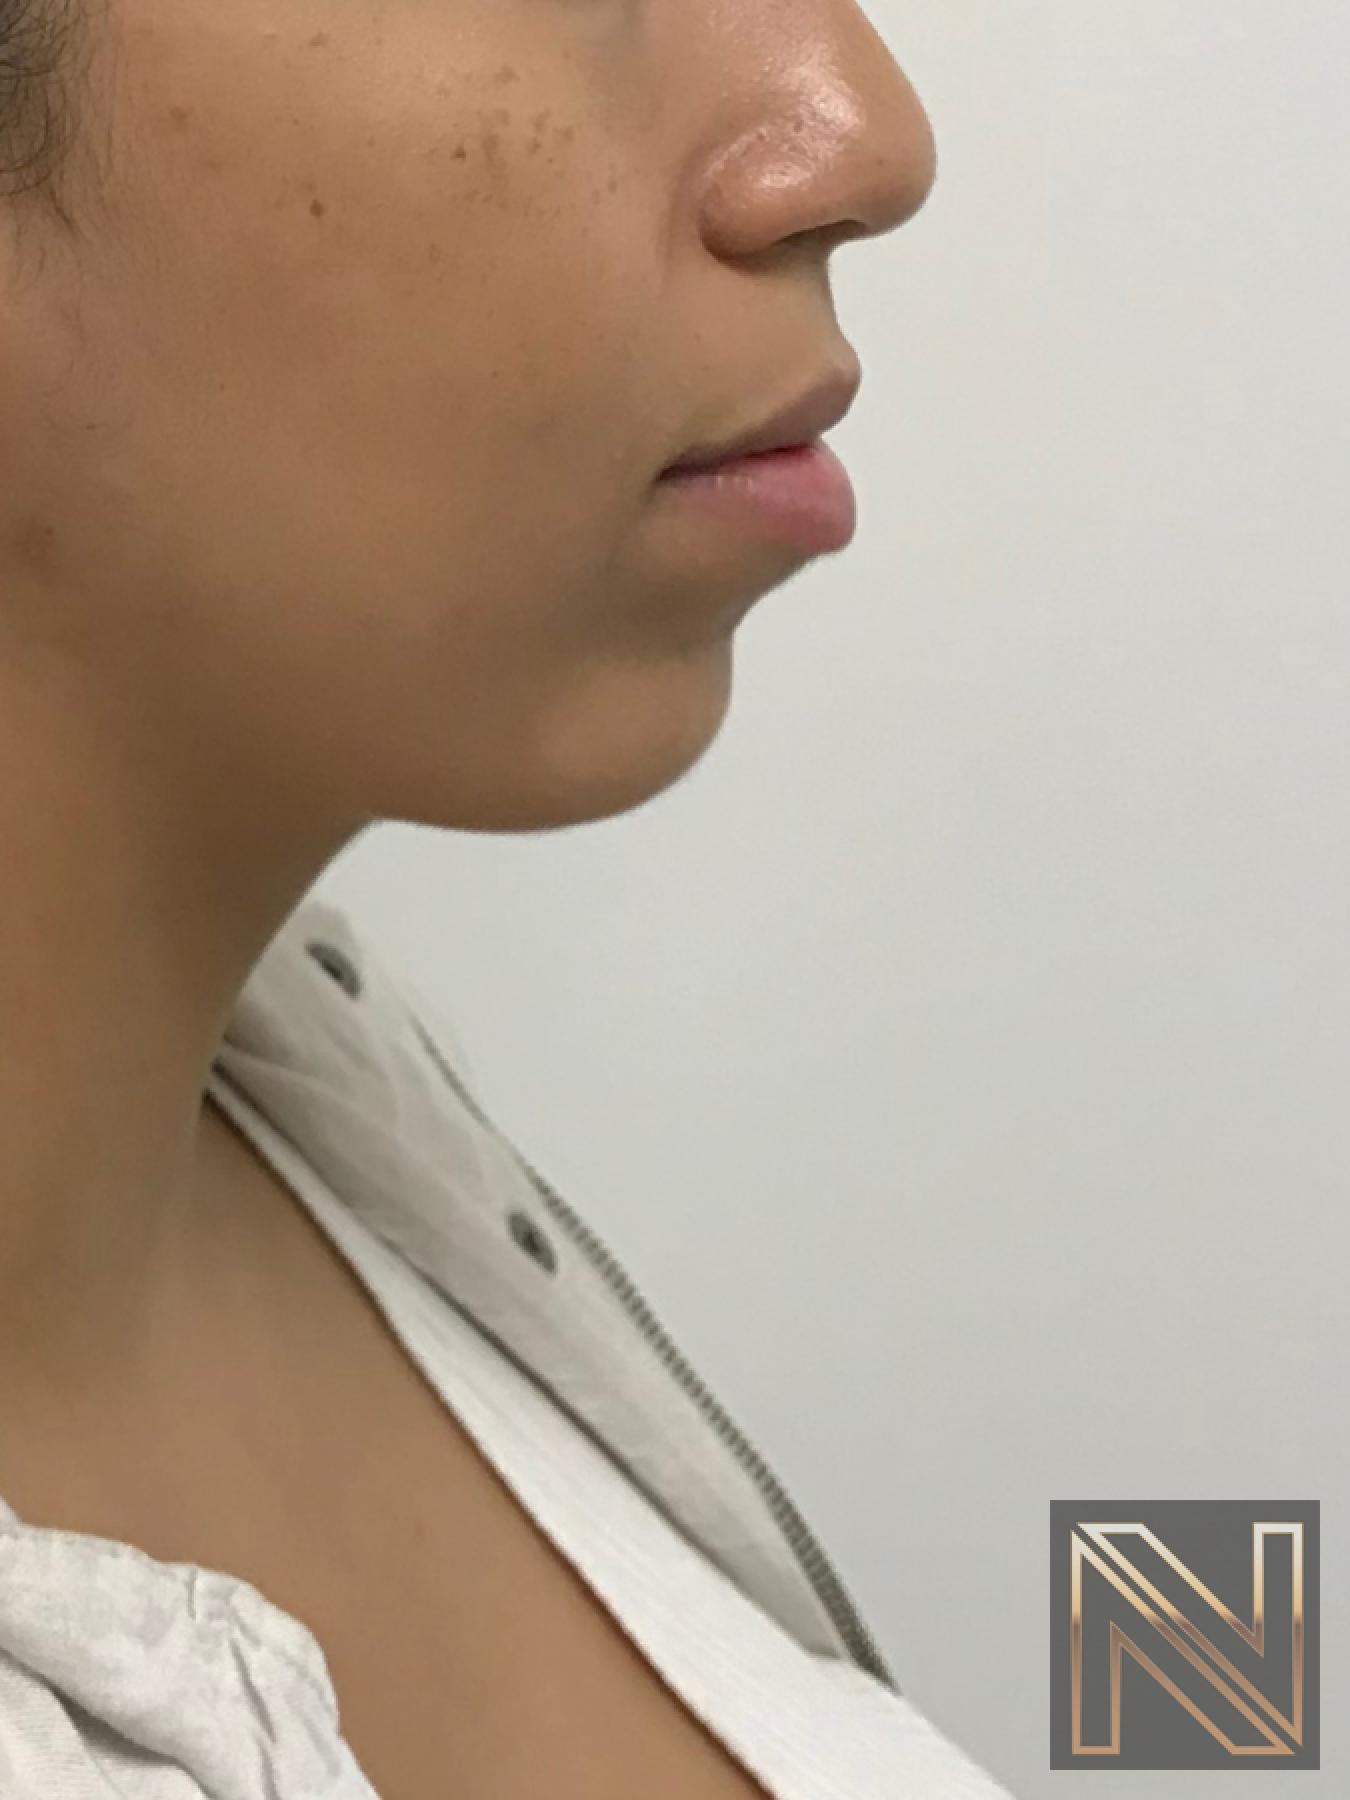 Chin Augmentation: Patient 1 - After  